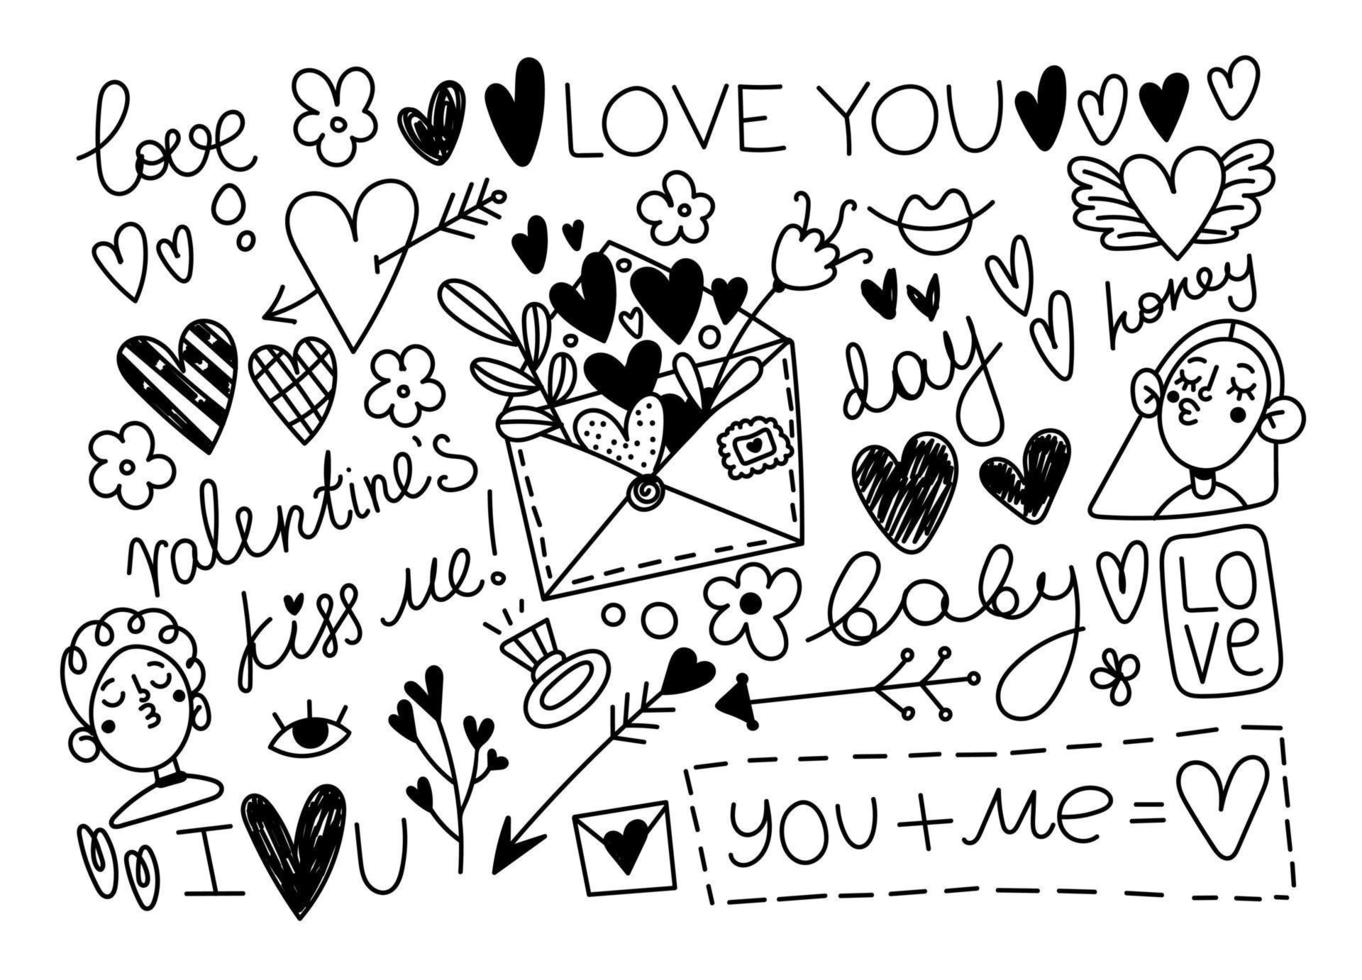 Hearts, arrows, kisses, love calligraphy vector set. Valentine's day and wedding hand drawn doodle. Different sketch elements for design and scrapbooking.